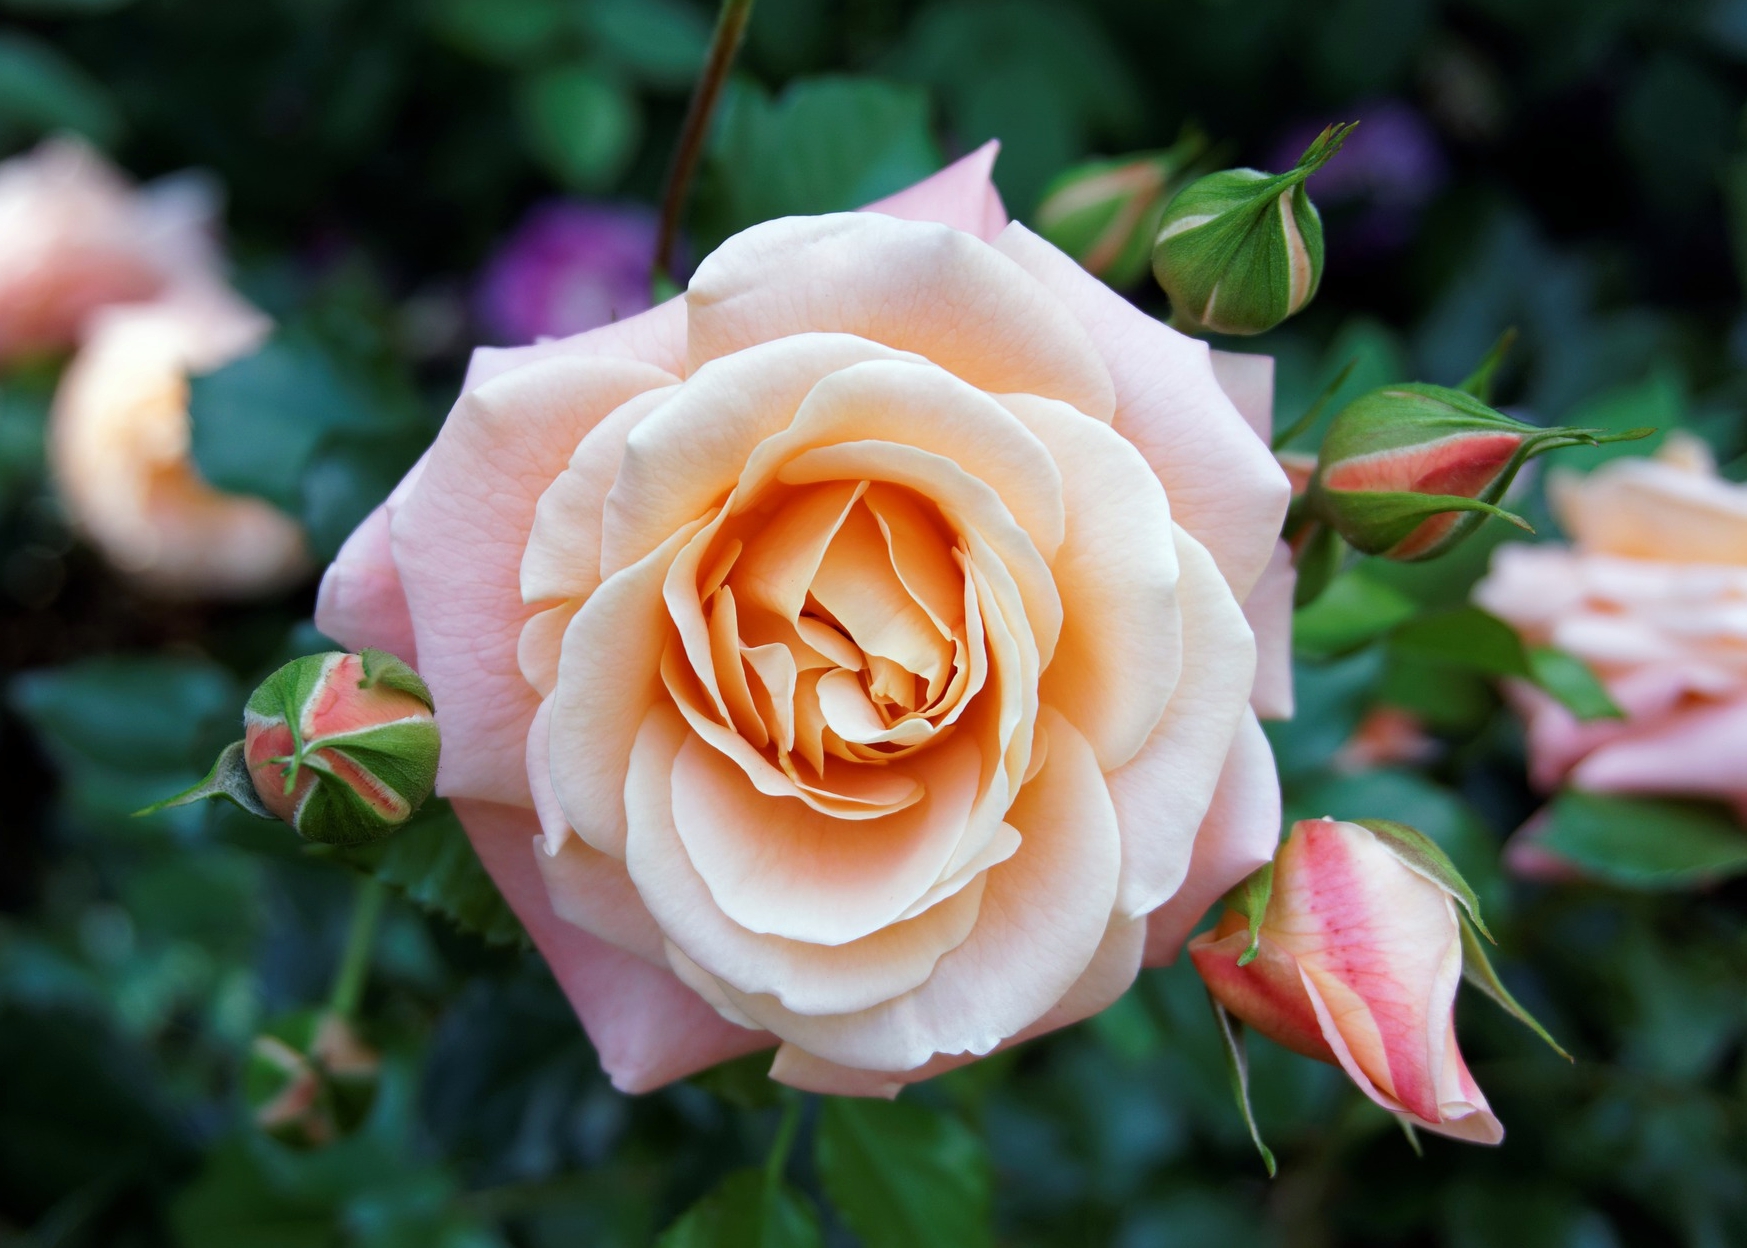 roses: planting, growing, and pruning roses | the old farmer's almanac